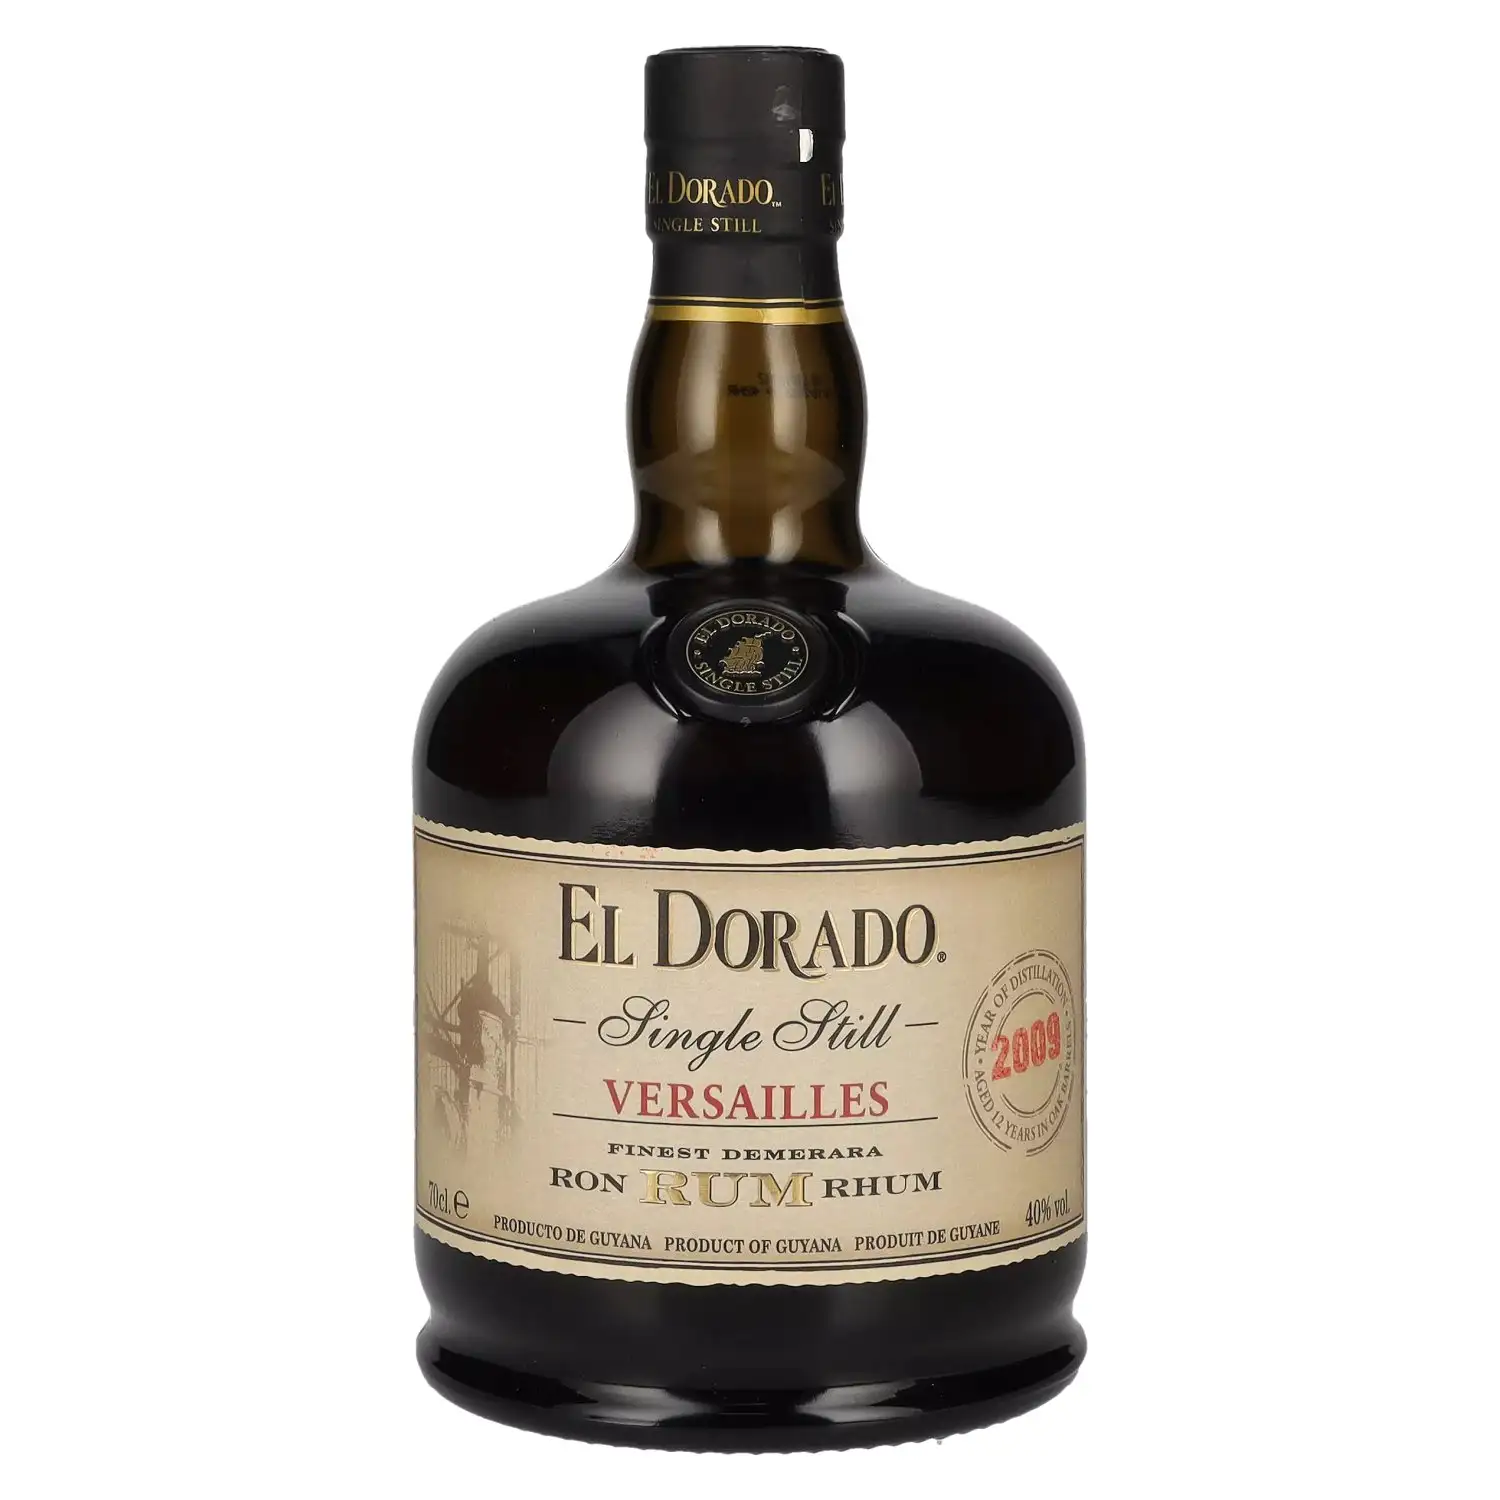 Image of the front of the bottle of the rum El Dorado Single Still Versailles